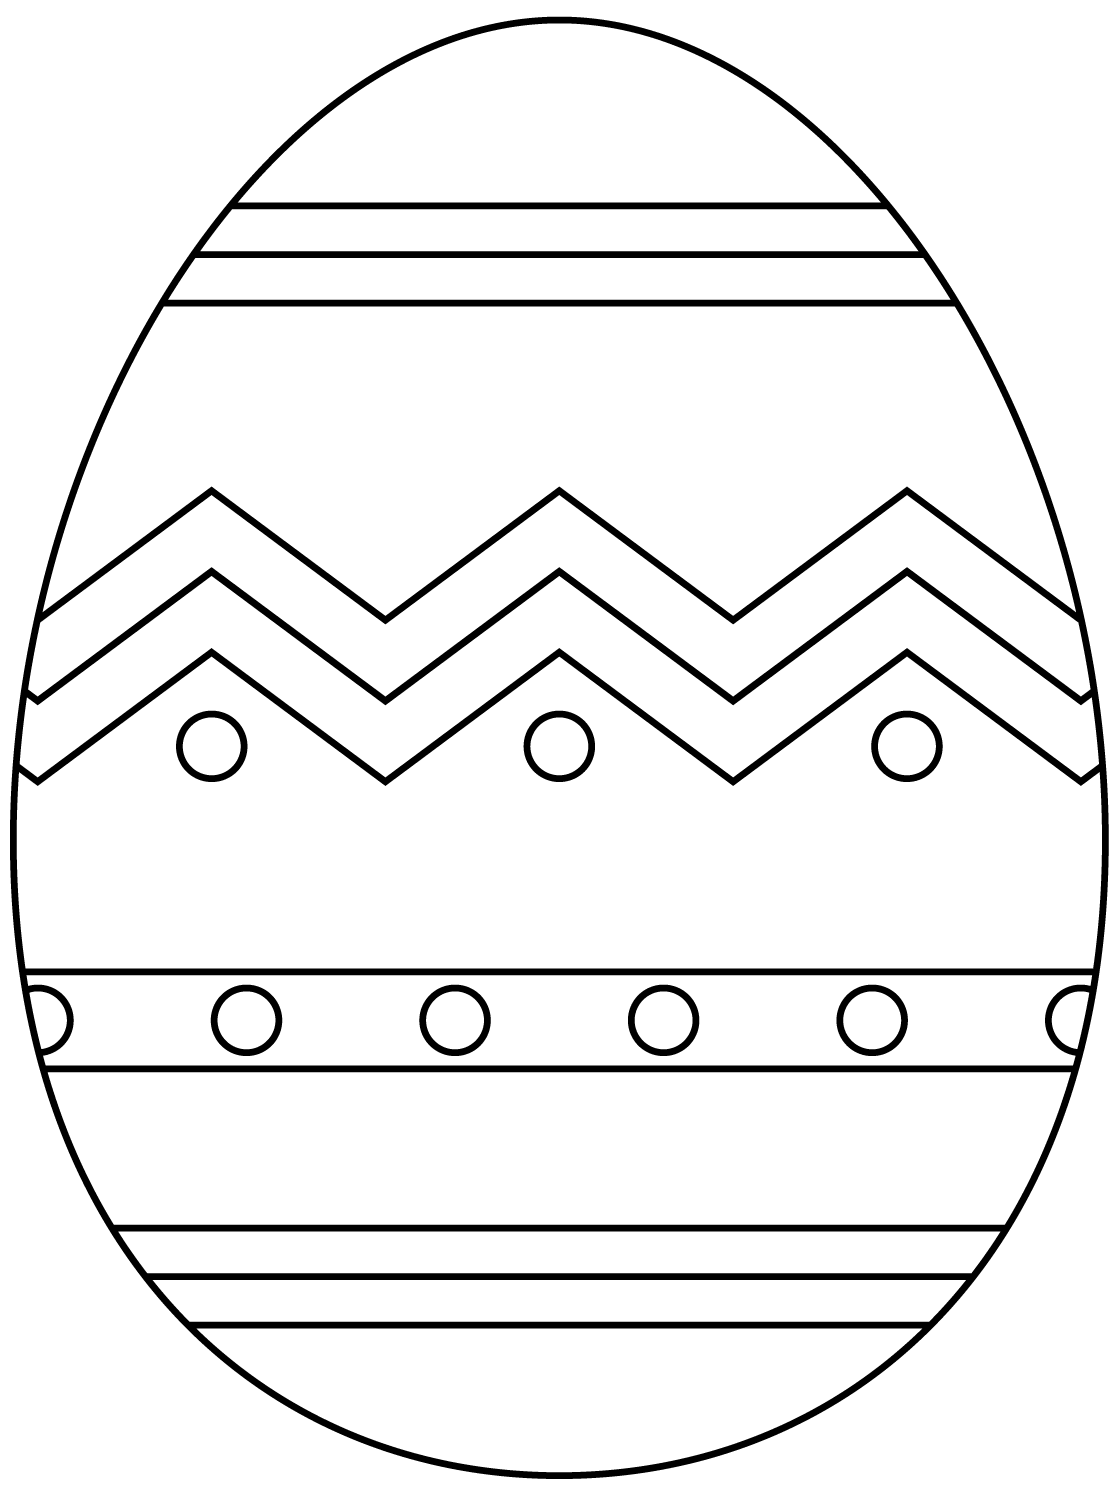 Easter Egg With Abstract Pattern 1 Coloring Page